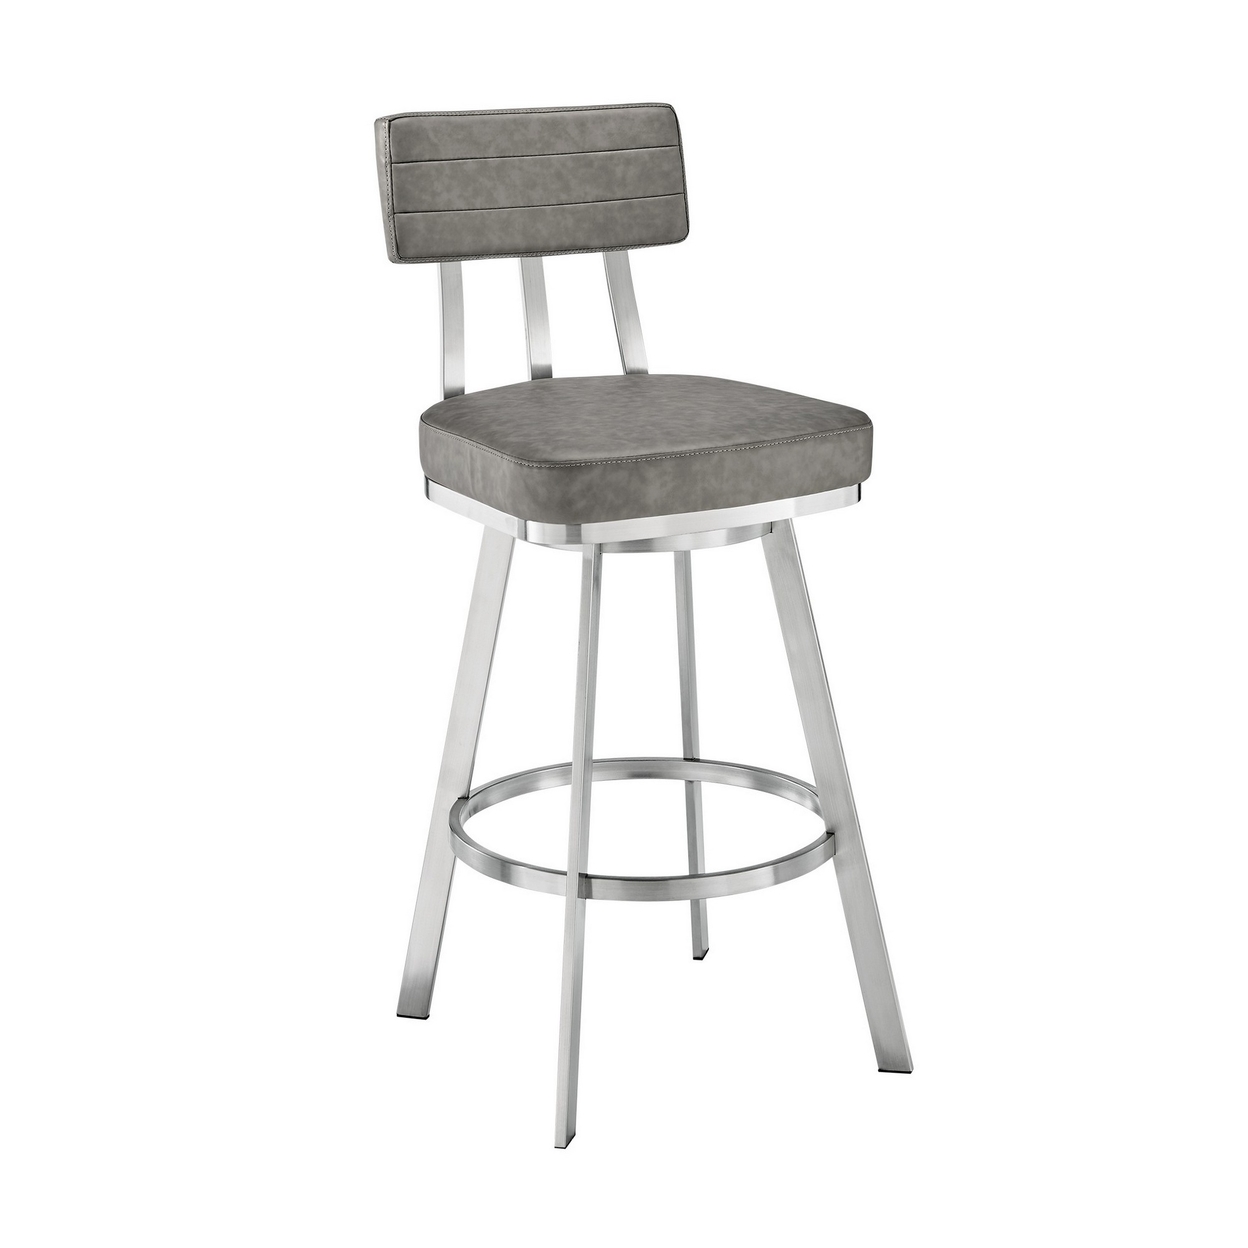 Col 26 Inch Swivel Counter Stool, Gray Faux Leather, Stainless Steel Frame- Saltoro Sherpi